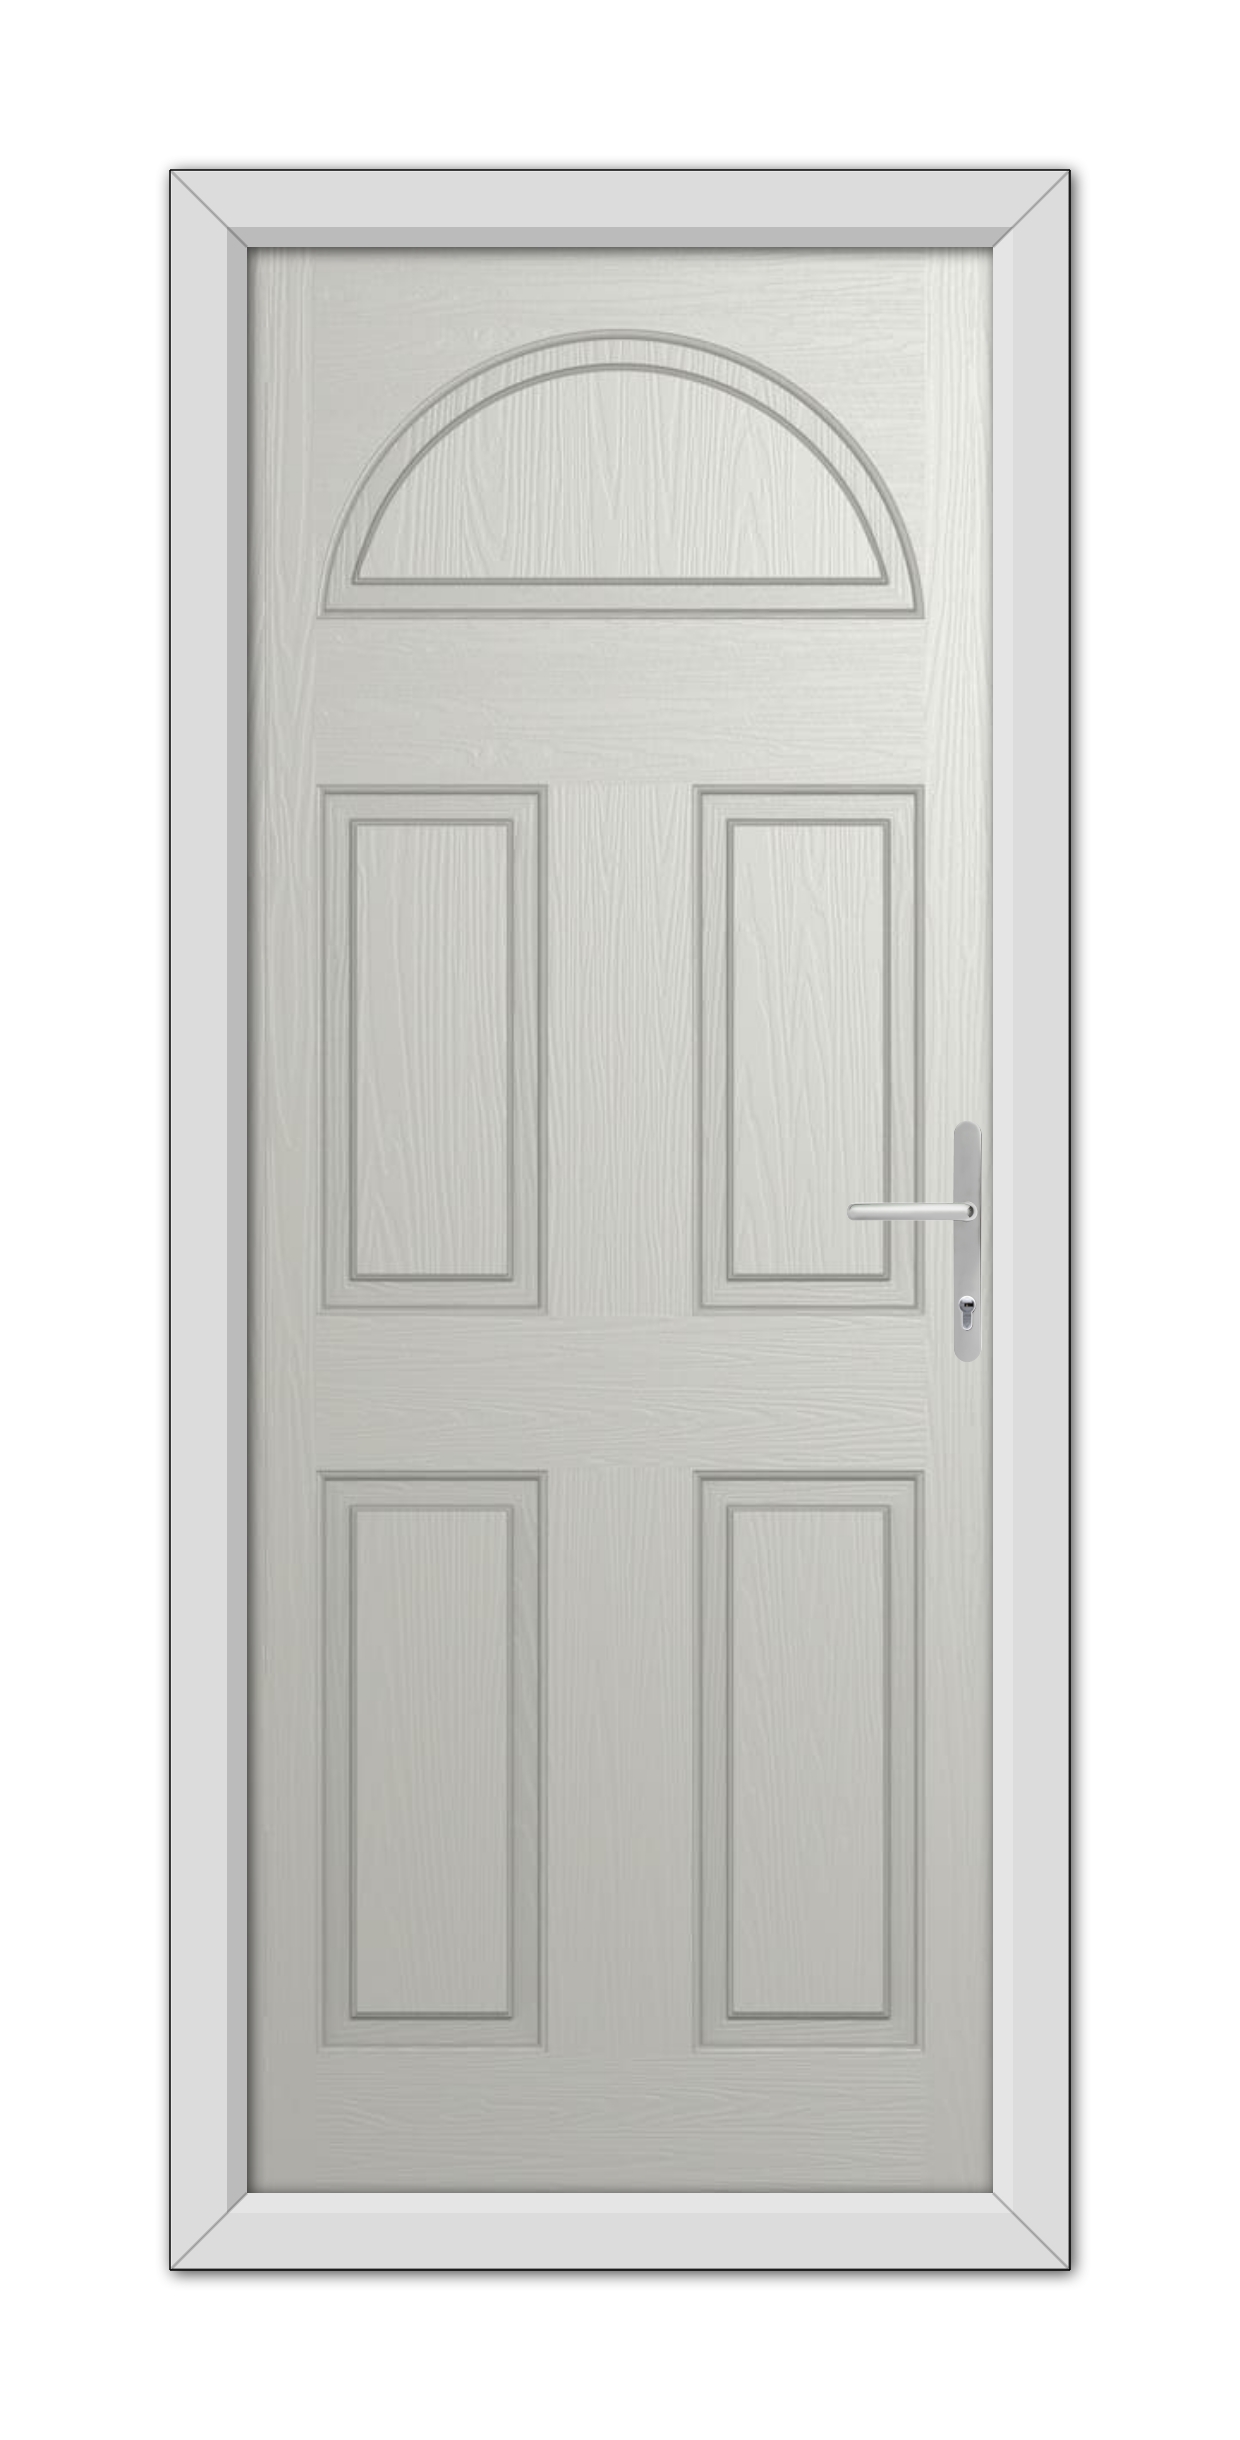 A closed Agate Grey Winslow Solid Composite door with an arched window at the top, set in a simple frame, featuring a modern handle.